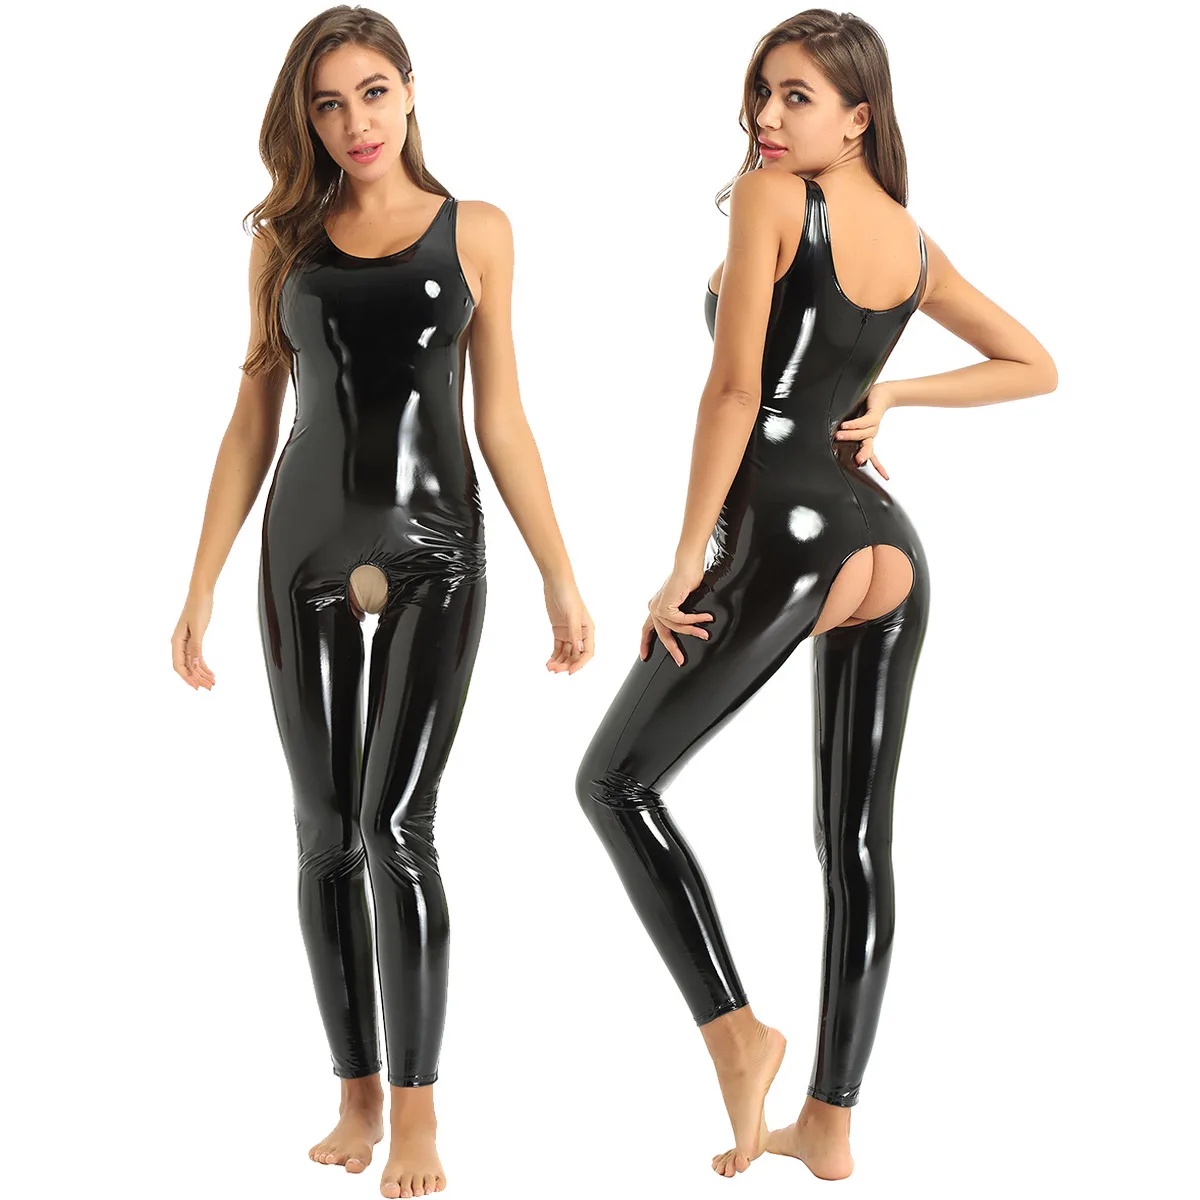 Sexy Hot Women Wetlook Faux Leather Catsuit PVC Latex Bodysuit Crotchless Clubwear Back Zipper Open Crotch Stretch Jumpsuits